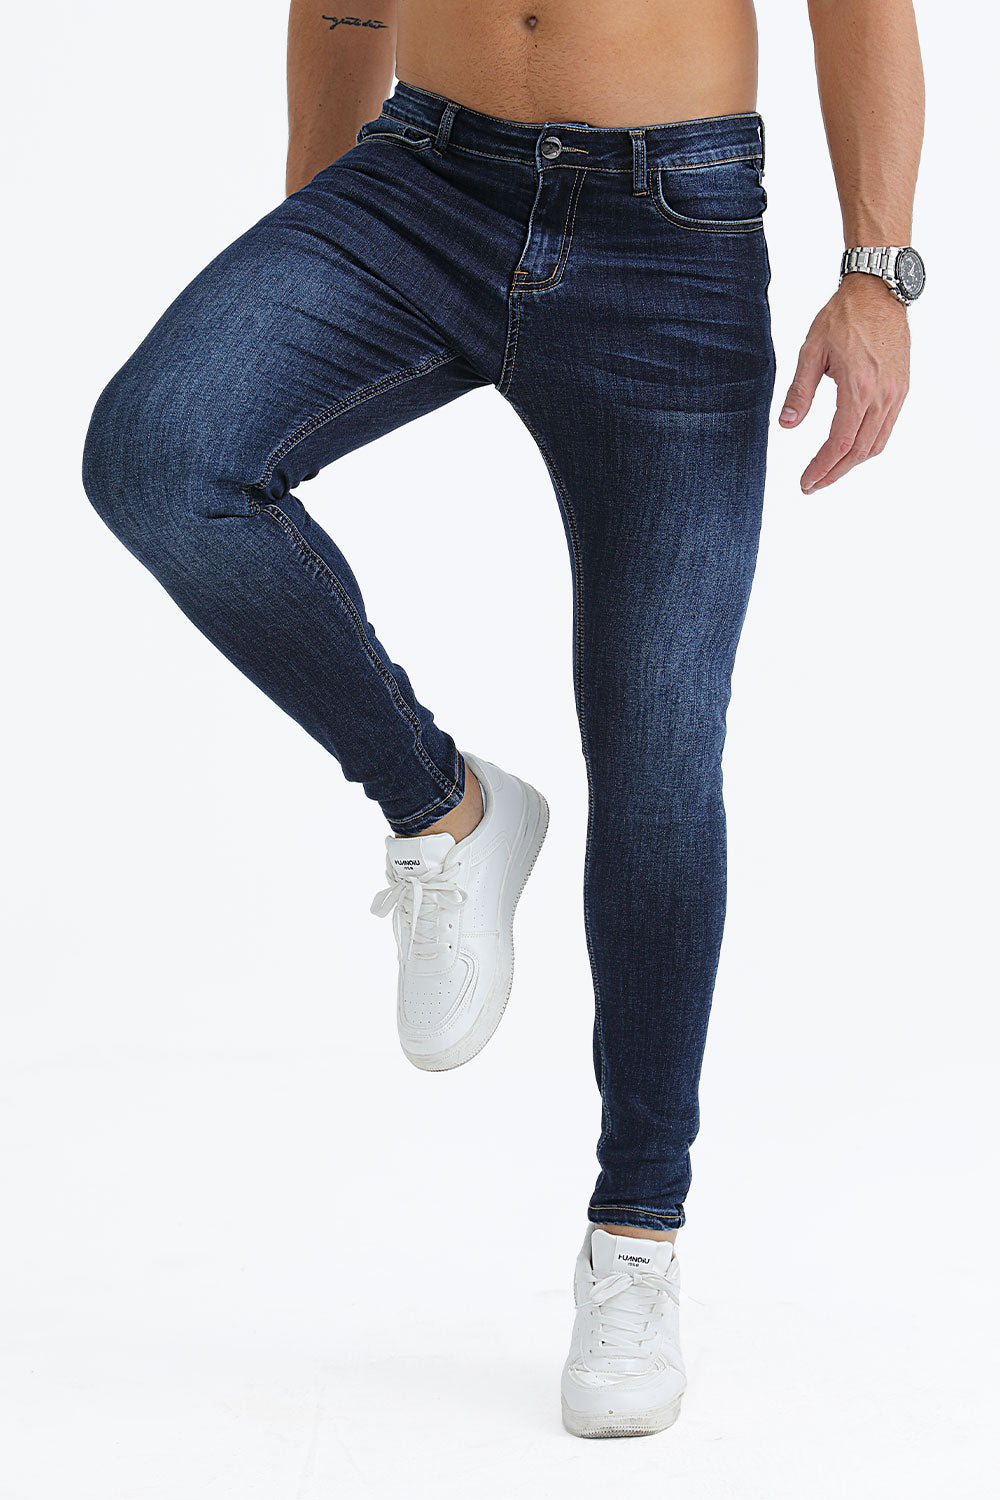 relaxed skinny jeans - blue